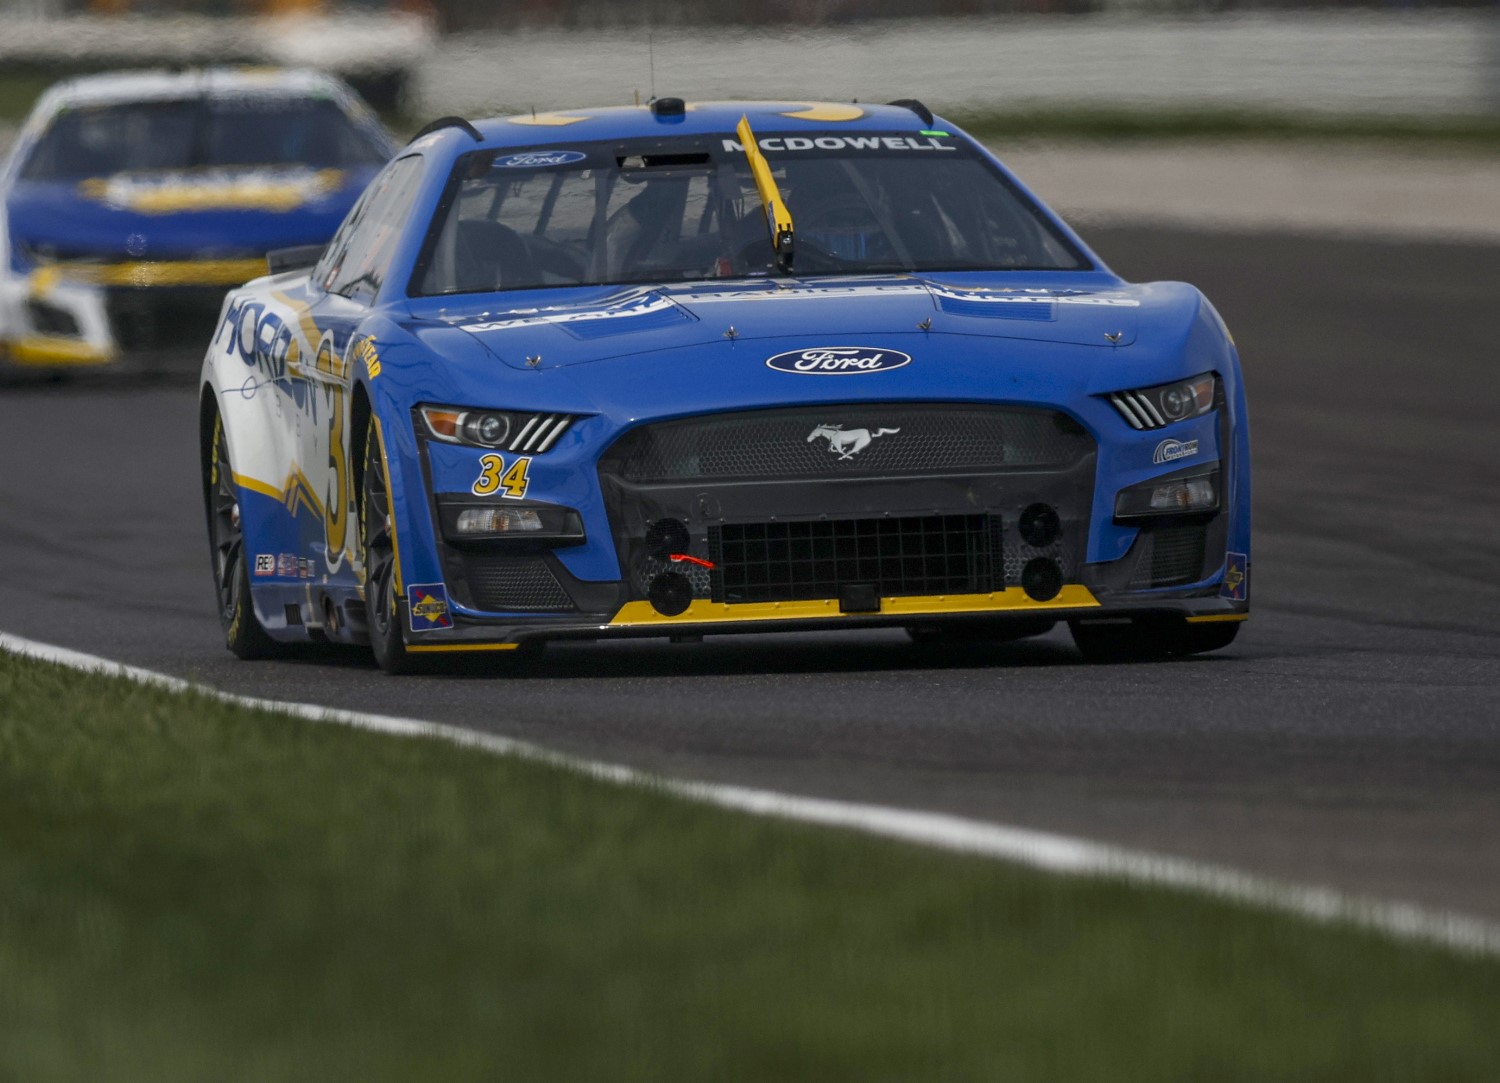 NASCAR McDowell wins Verizon 200 Cup race at Indy BVM Sports